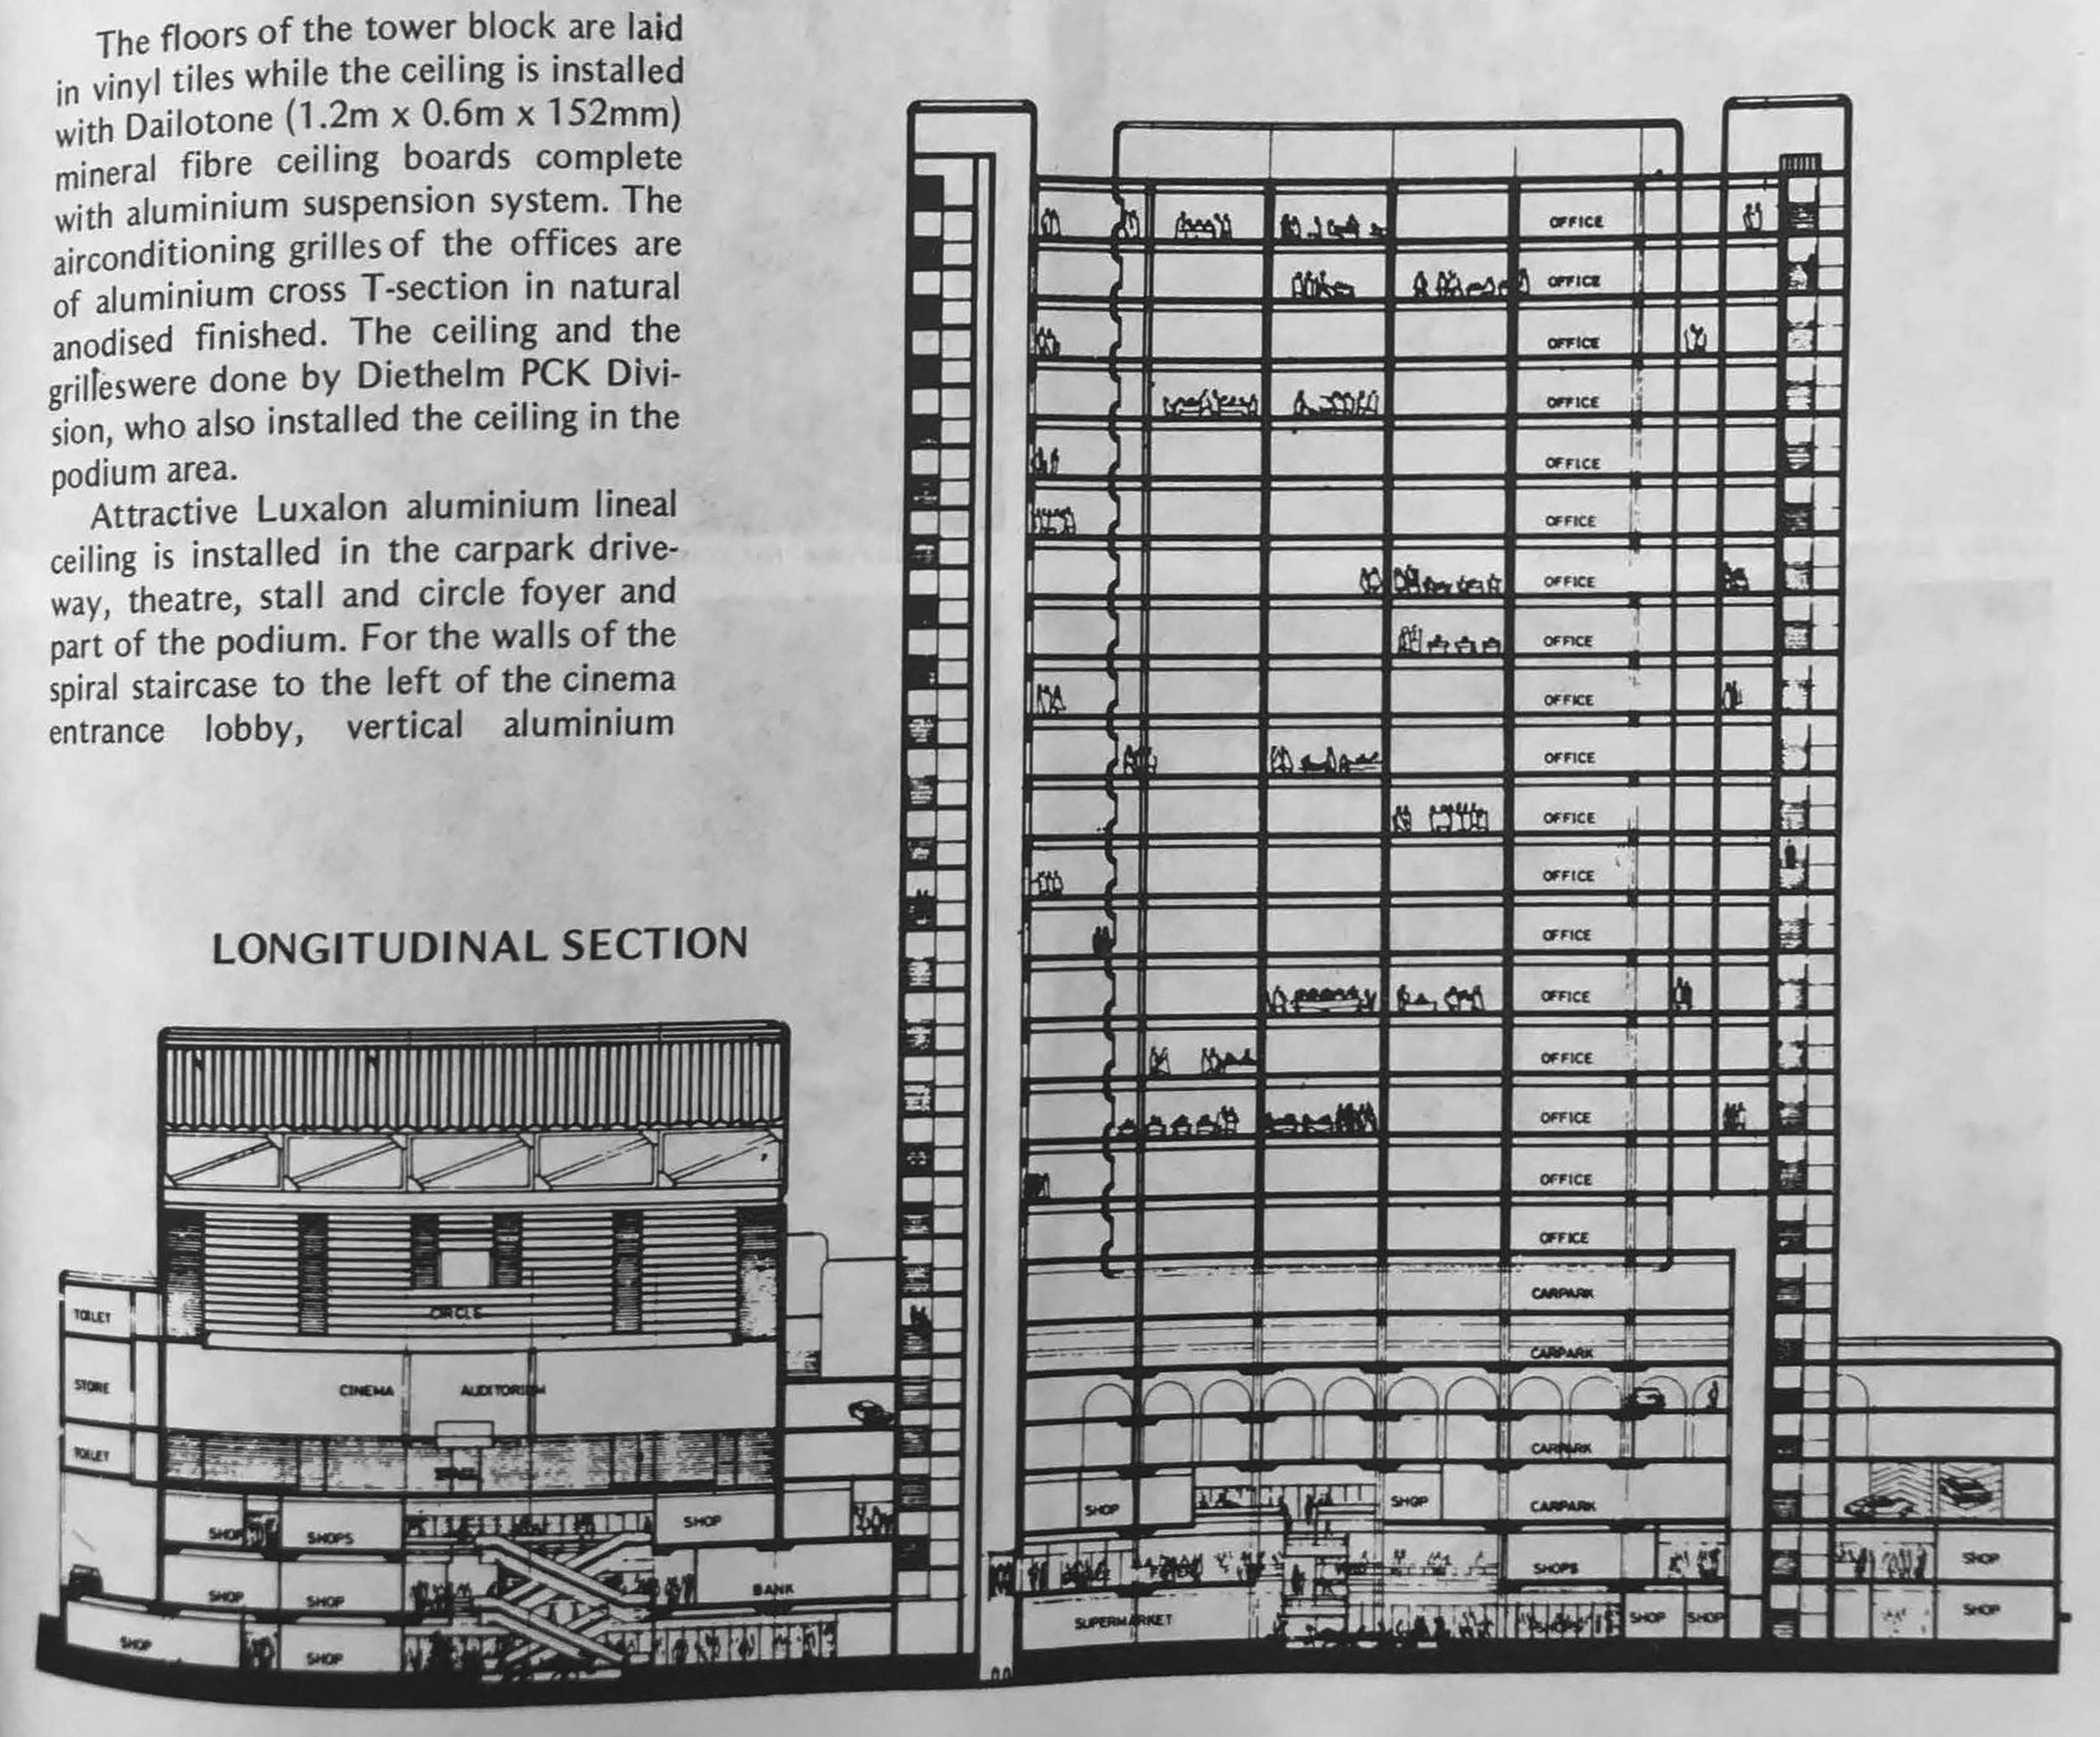 Section of Golden Mile Tower. Source: Building Materials &amp; Equipment, June (1976), p. 33.